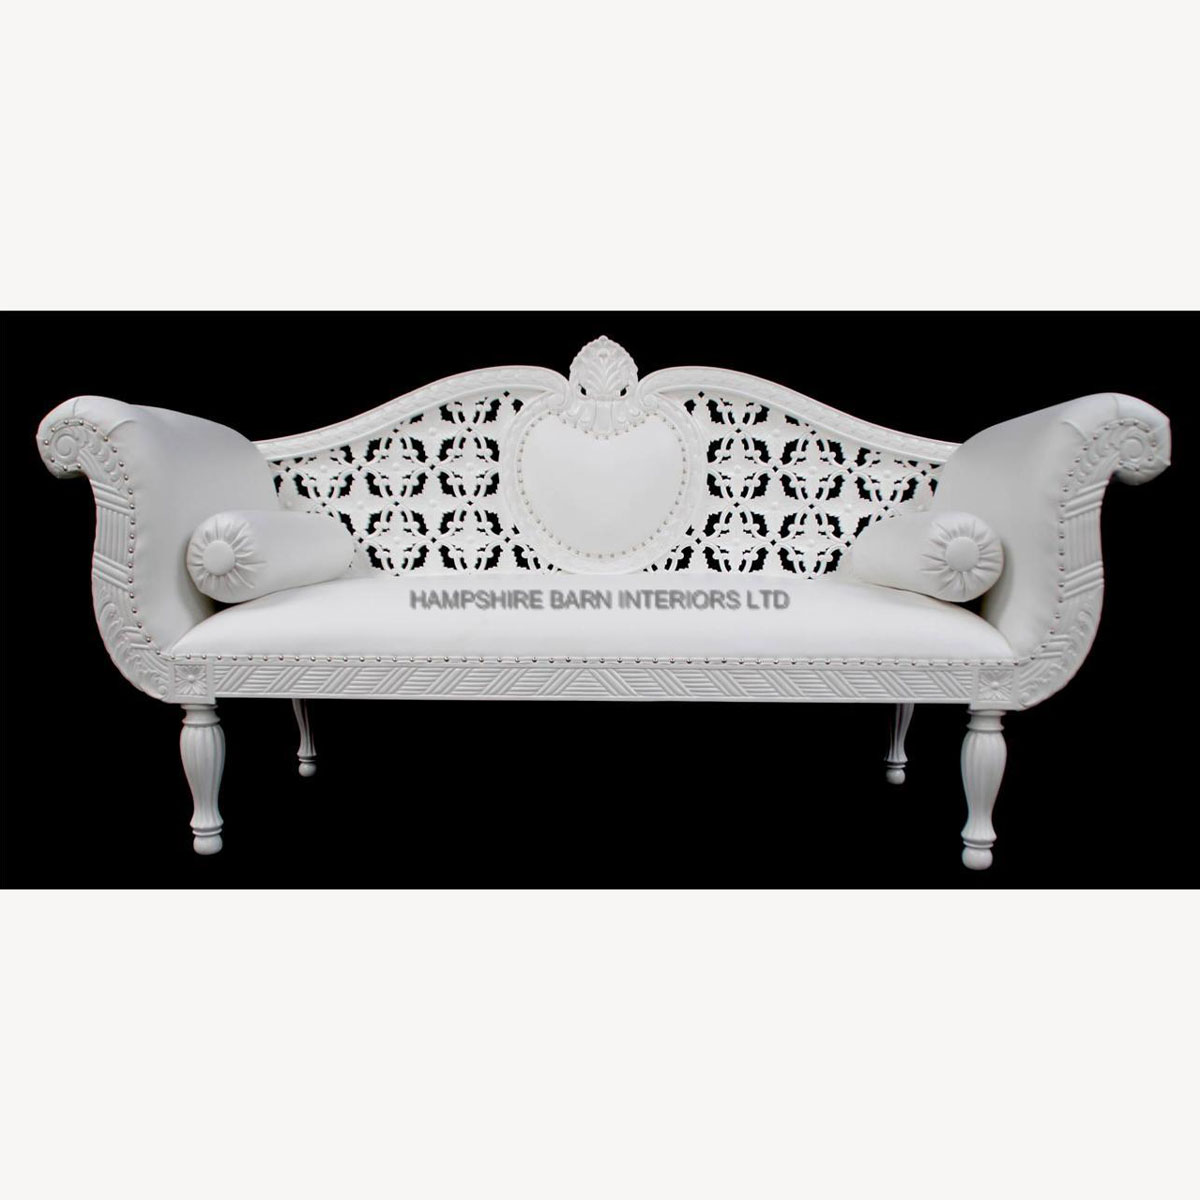 Royal Wedding Set Sofa Plus Two Chairs In Gloss White In Easiclean White Faux Leather 2 - Hampshire Barn Interiors - Royal Wedding Set (Sofa Plus Two Chairs) In Gloss White In Easiclean White Faux Leather -